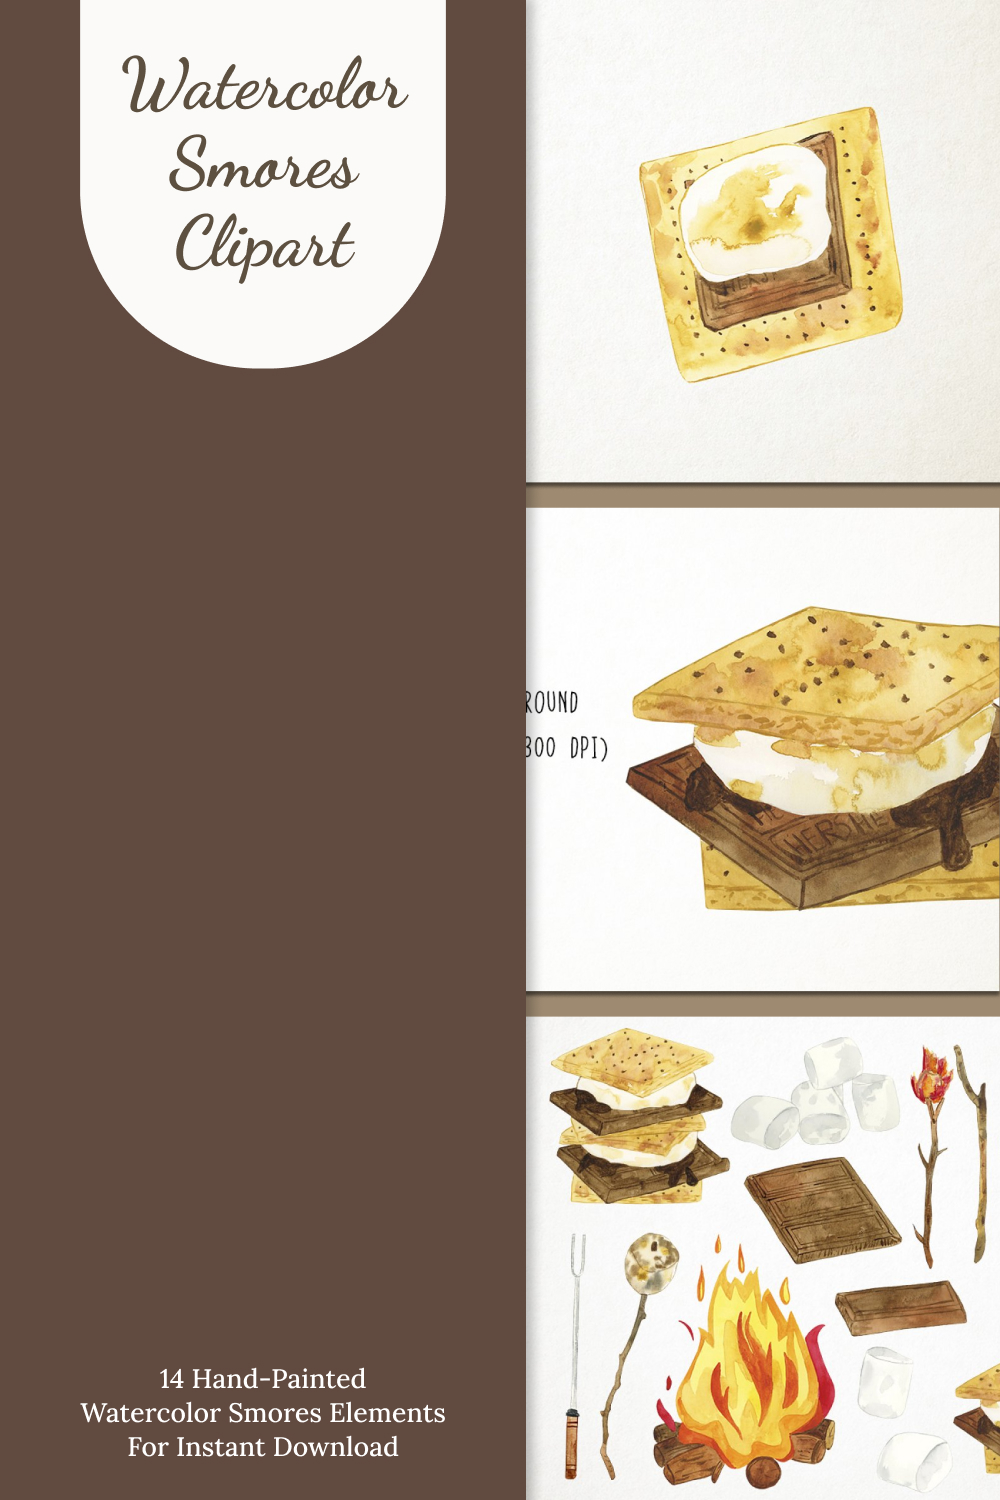 Watercolor smores clipart of pinterest.